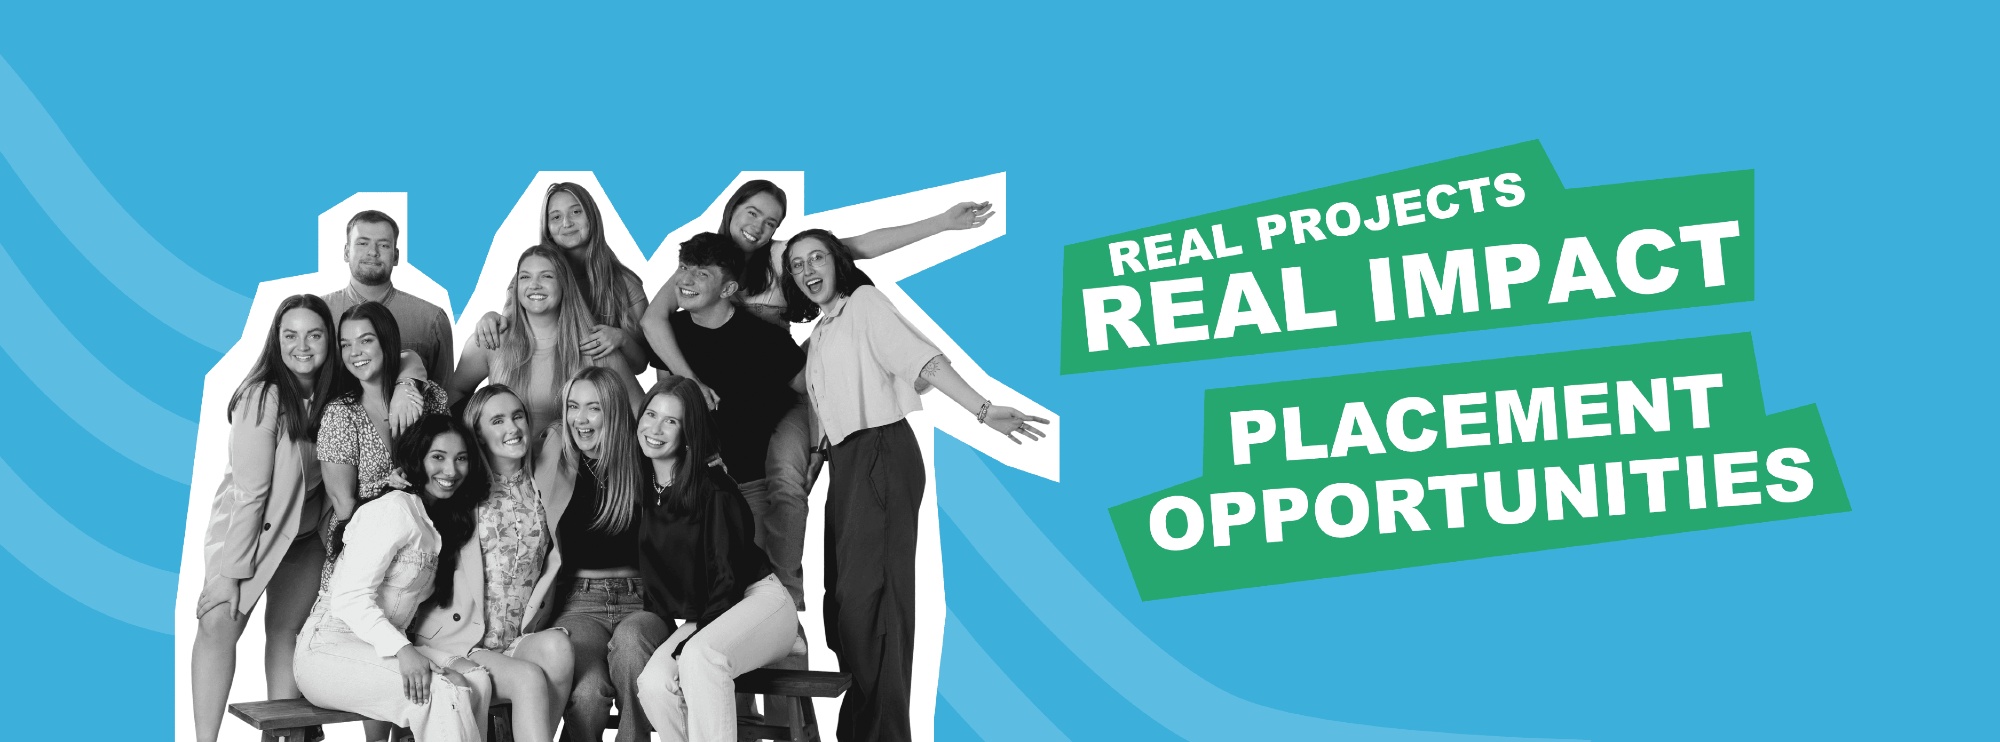 Real Projects real impact banner